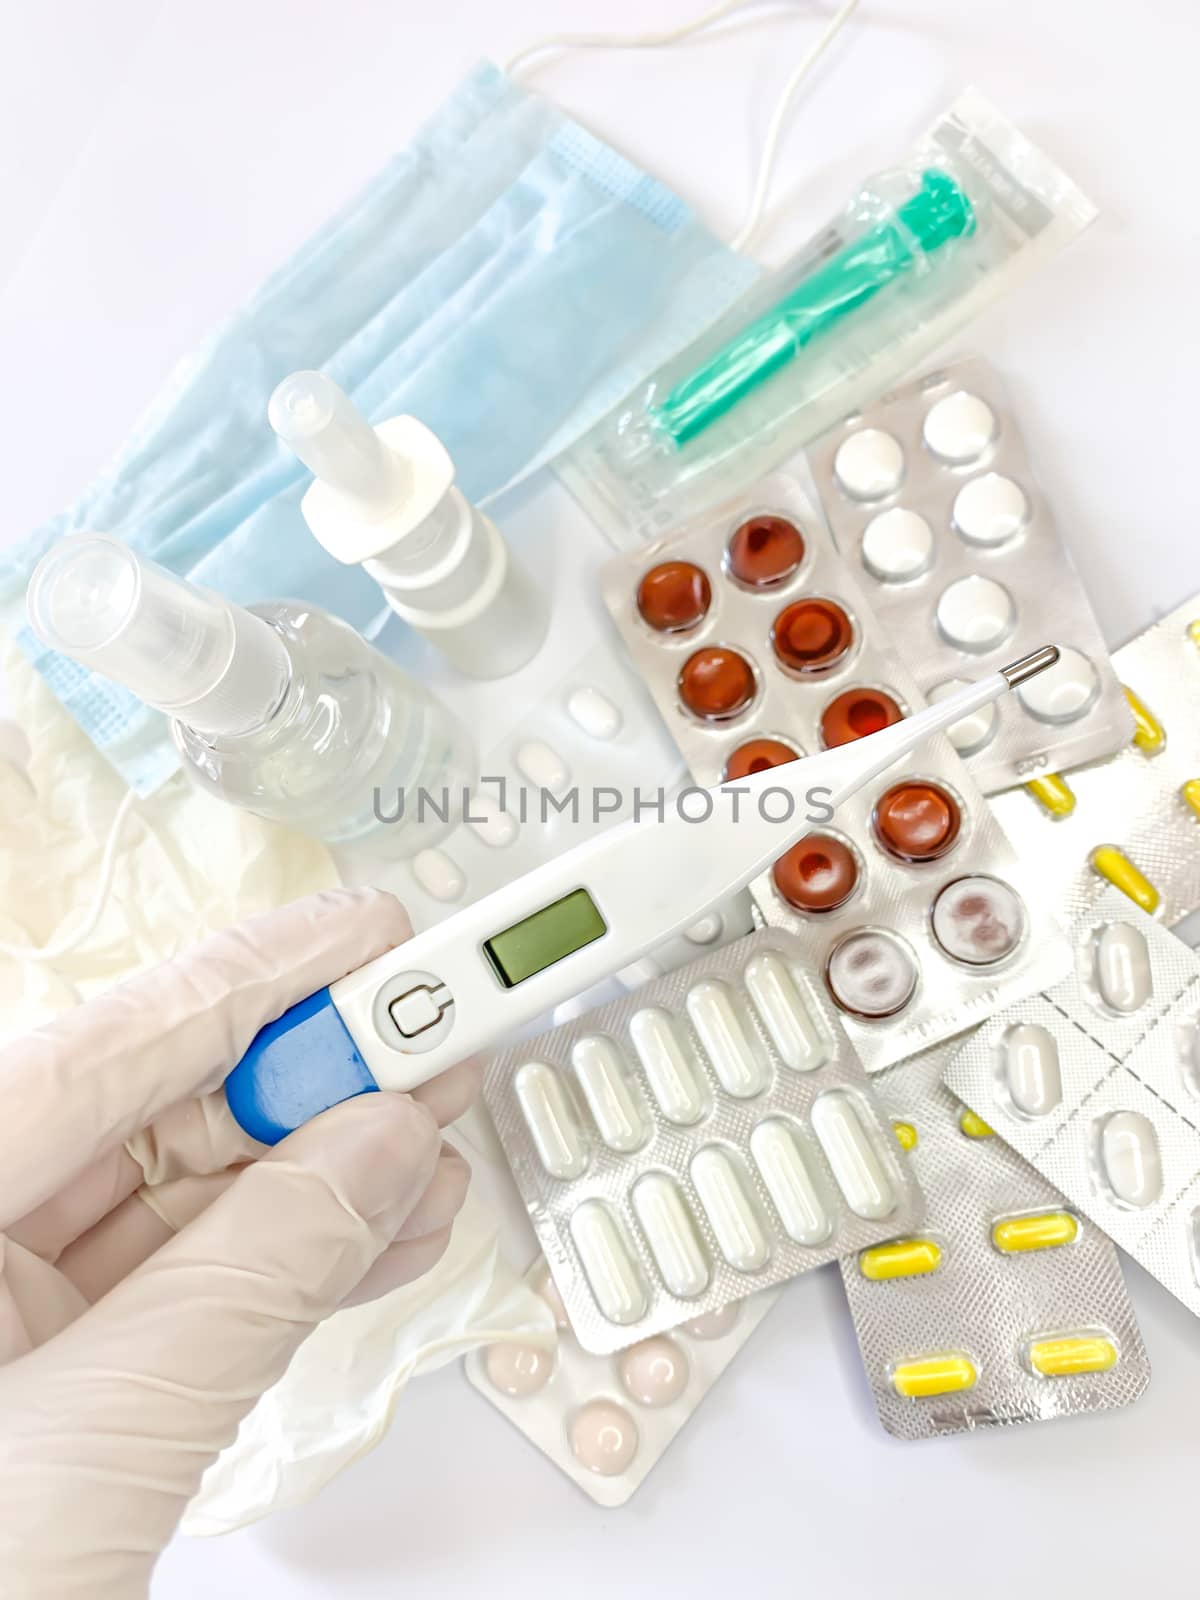 Digital thermometer for measuring body temperature in hand in glove of a woman on white background with many pills and medicines. Vertical image